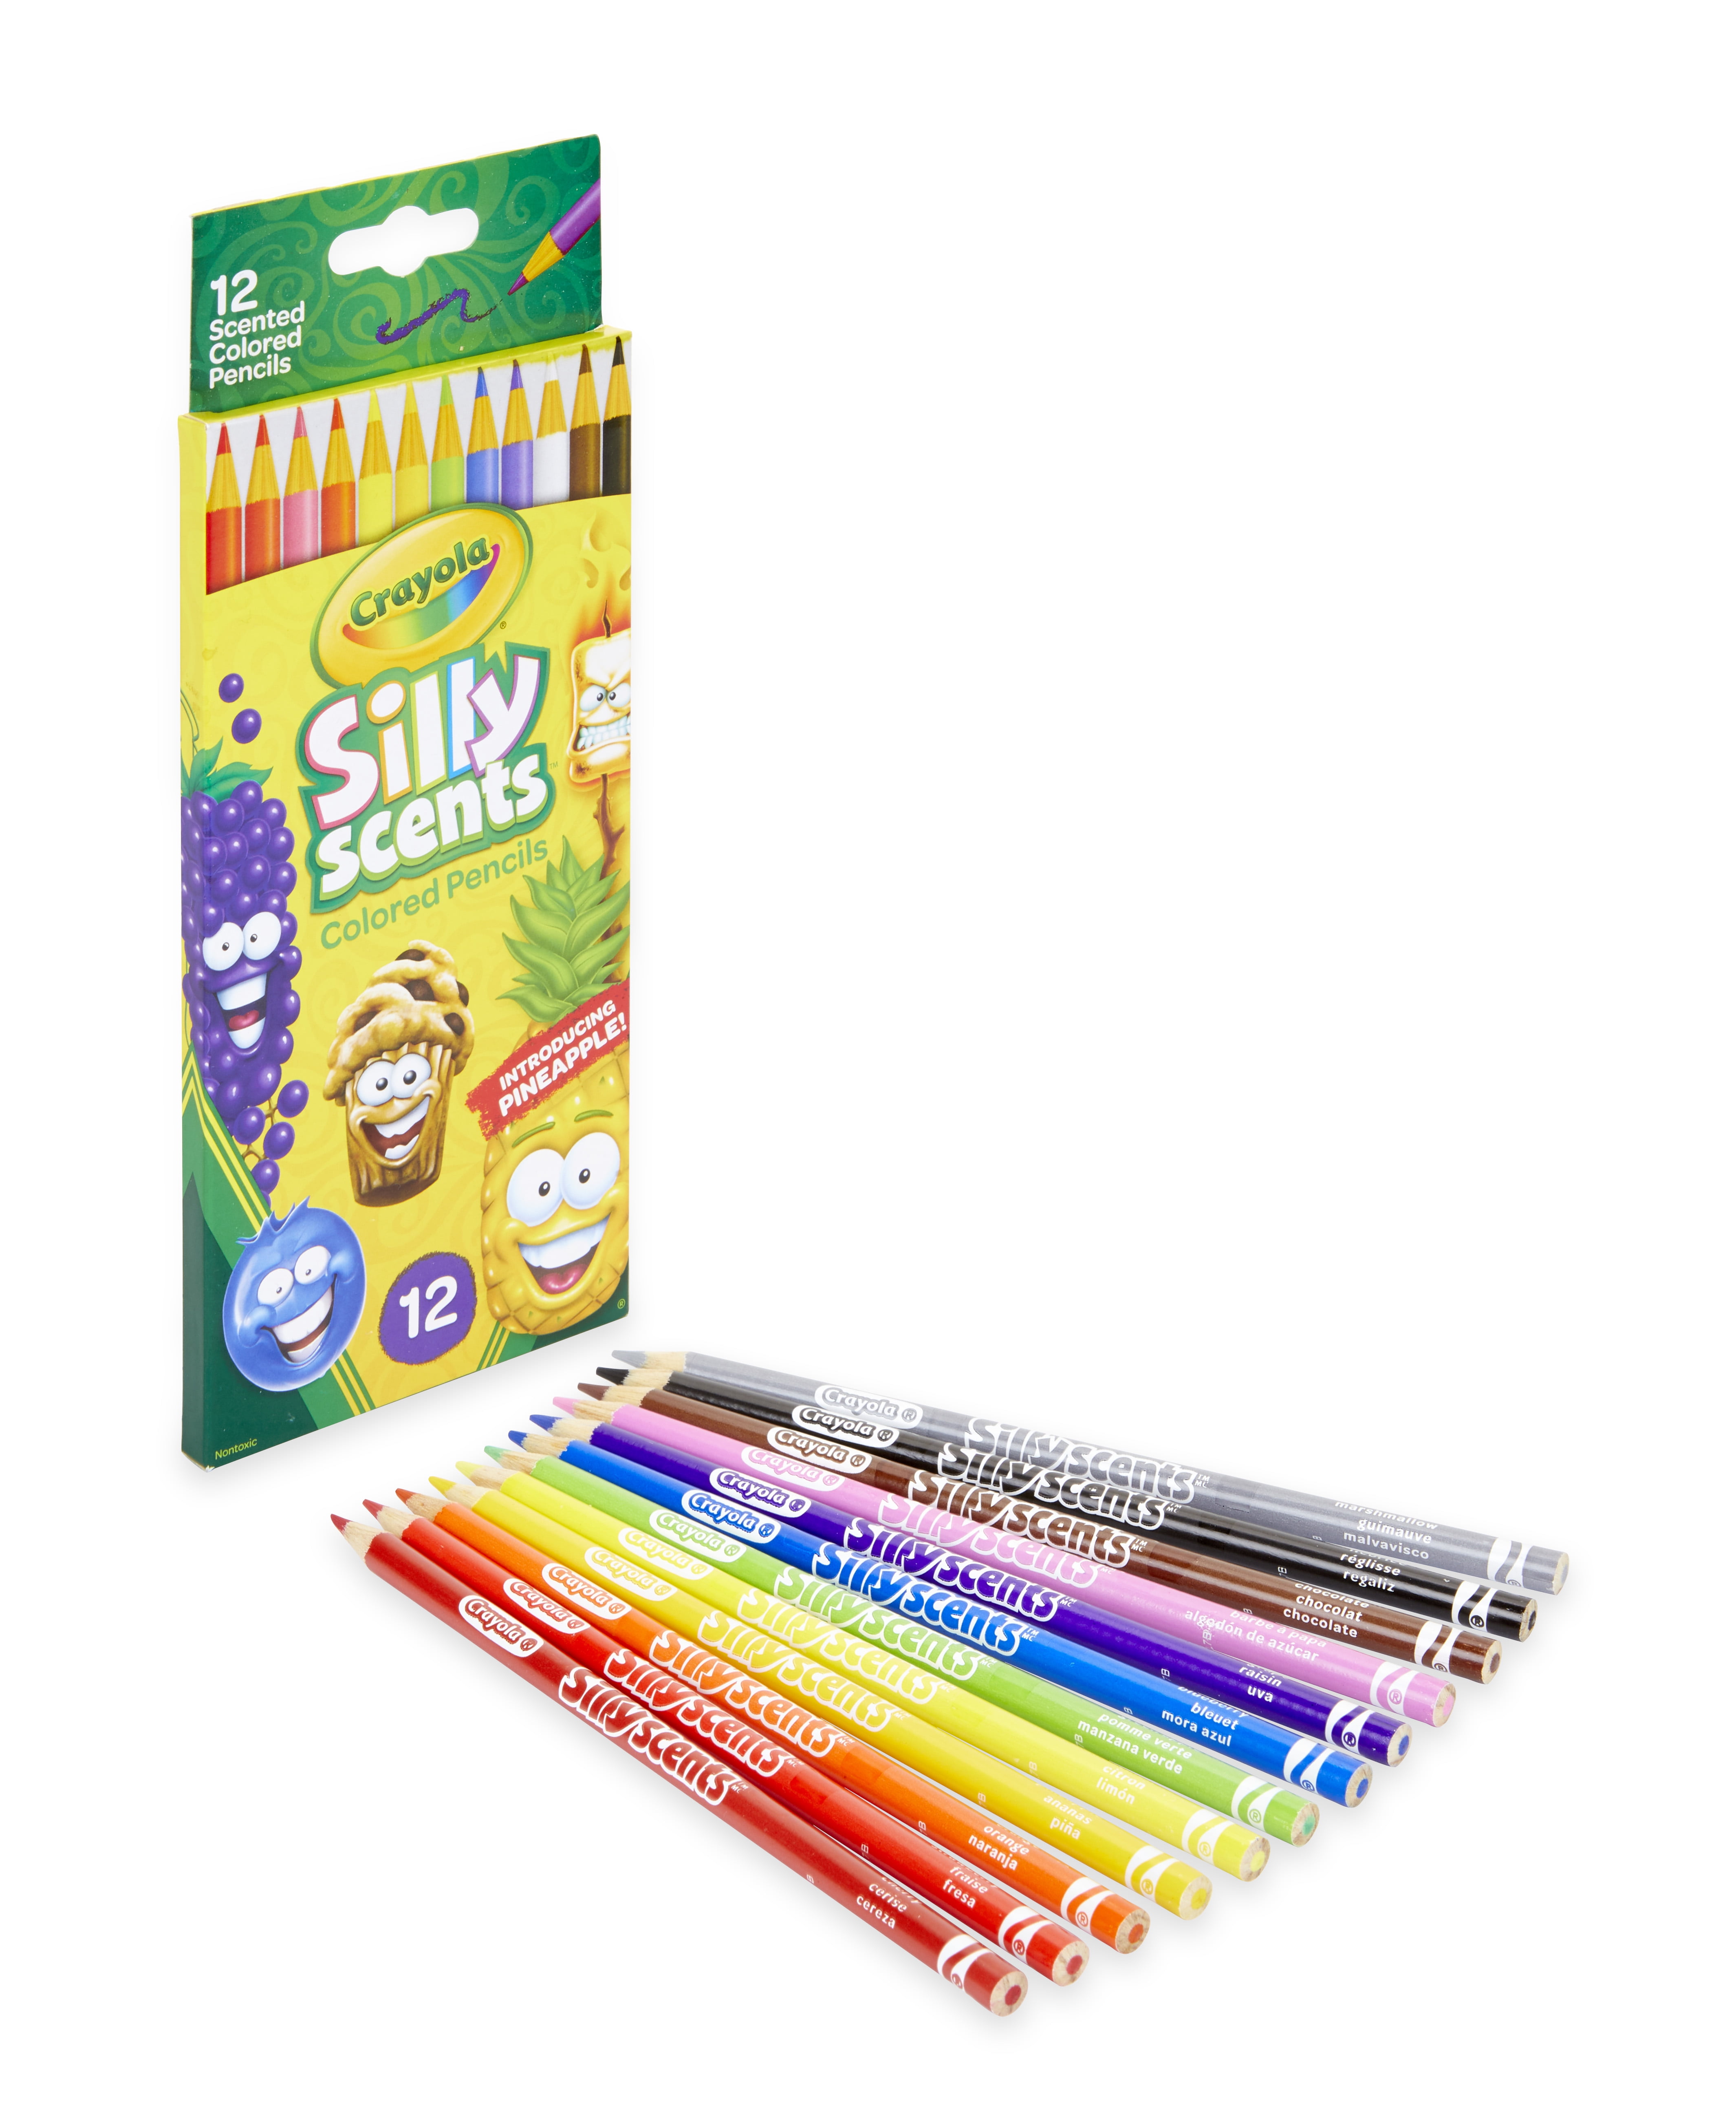 12 Scented Scribble Colouring Pencils Different Fruit Scents 